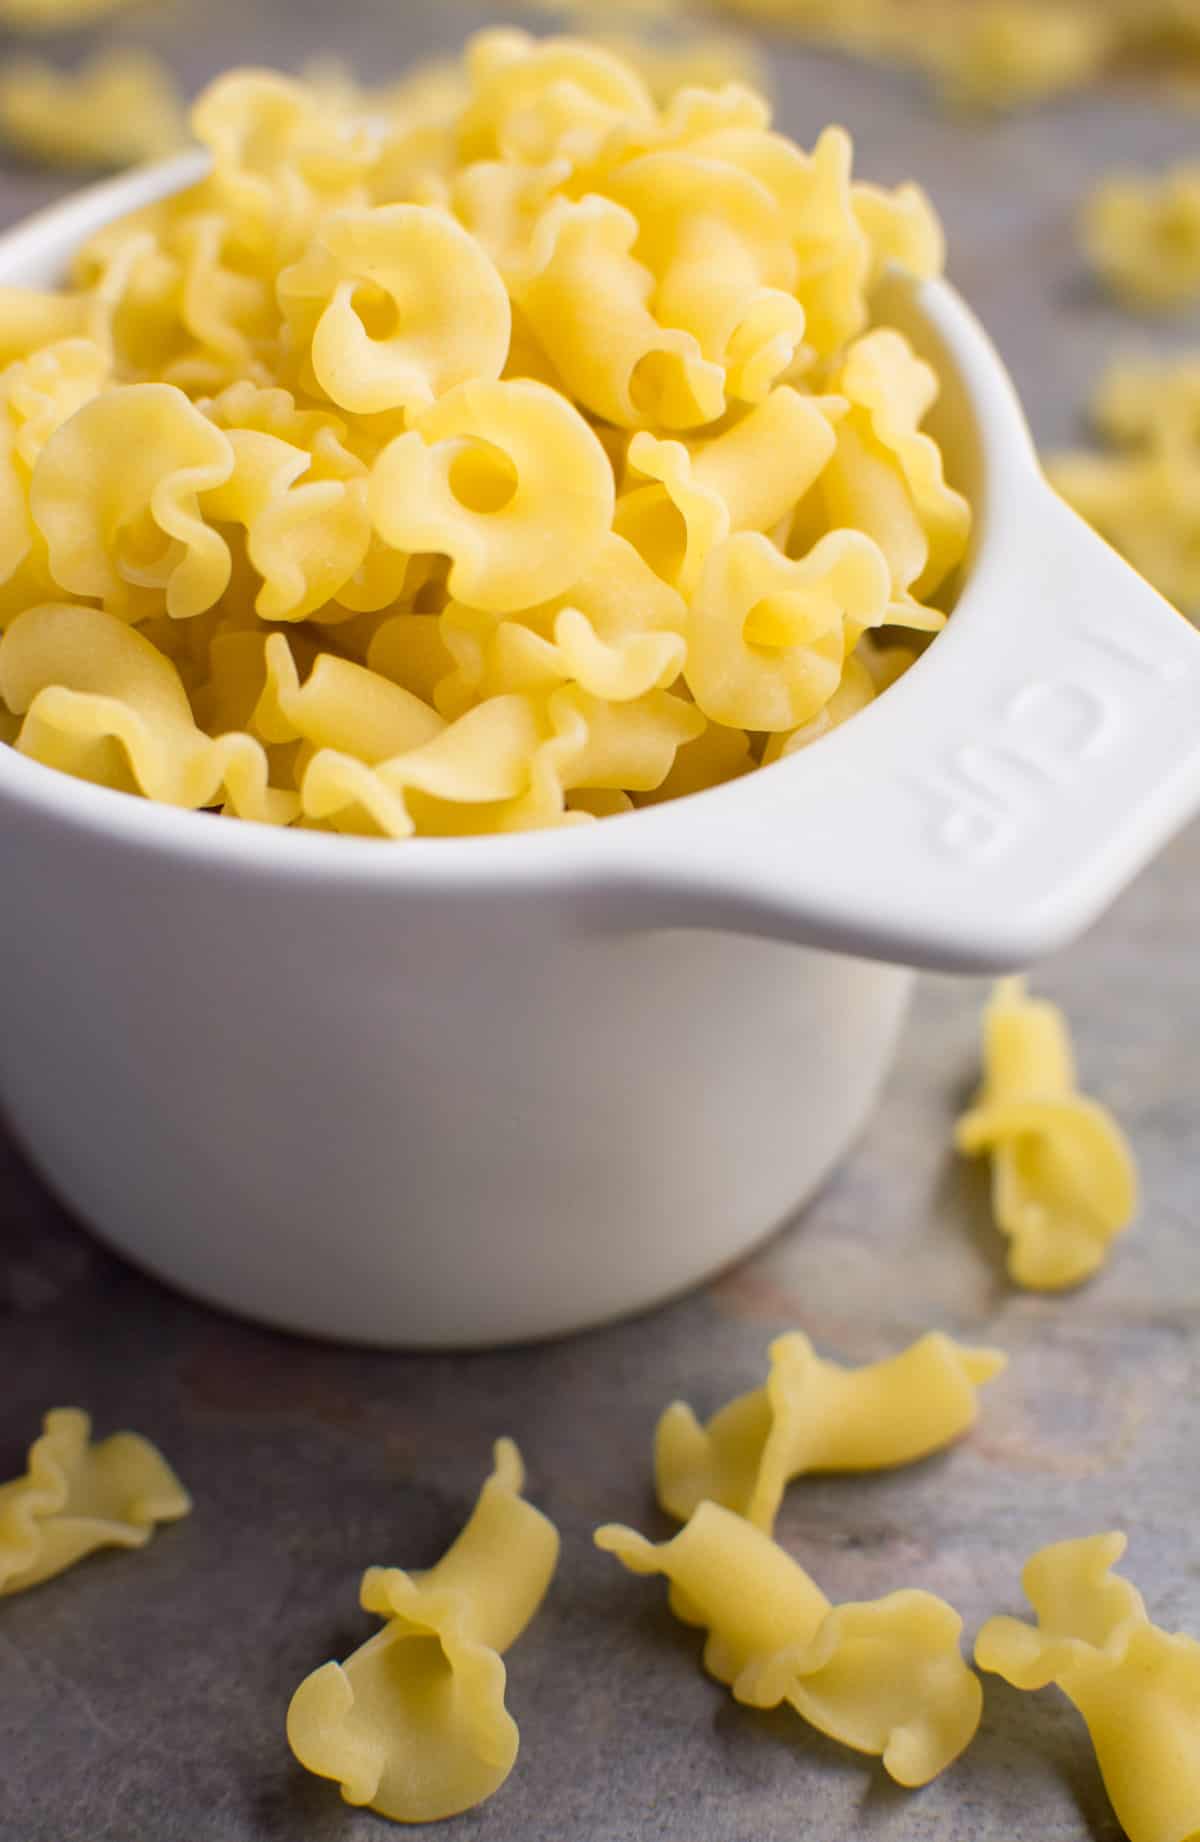 A white 1 cup measuring cup full of campanelle pasta.